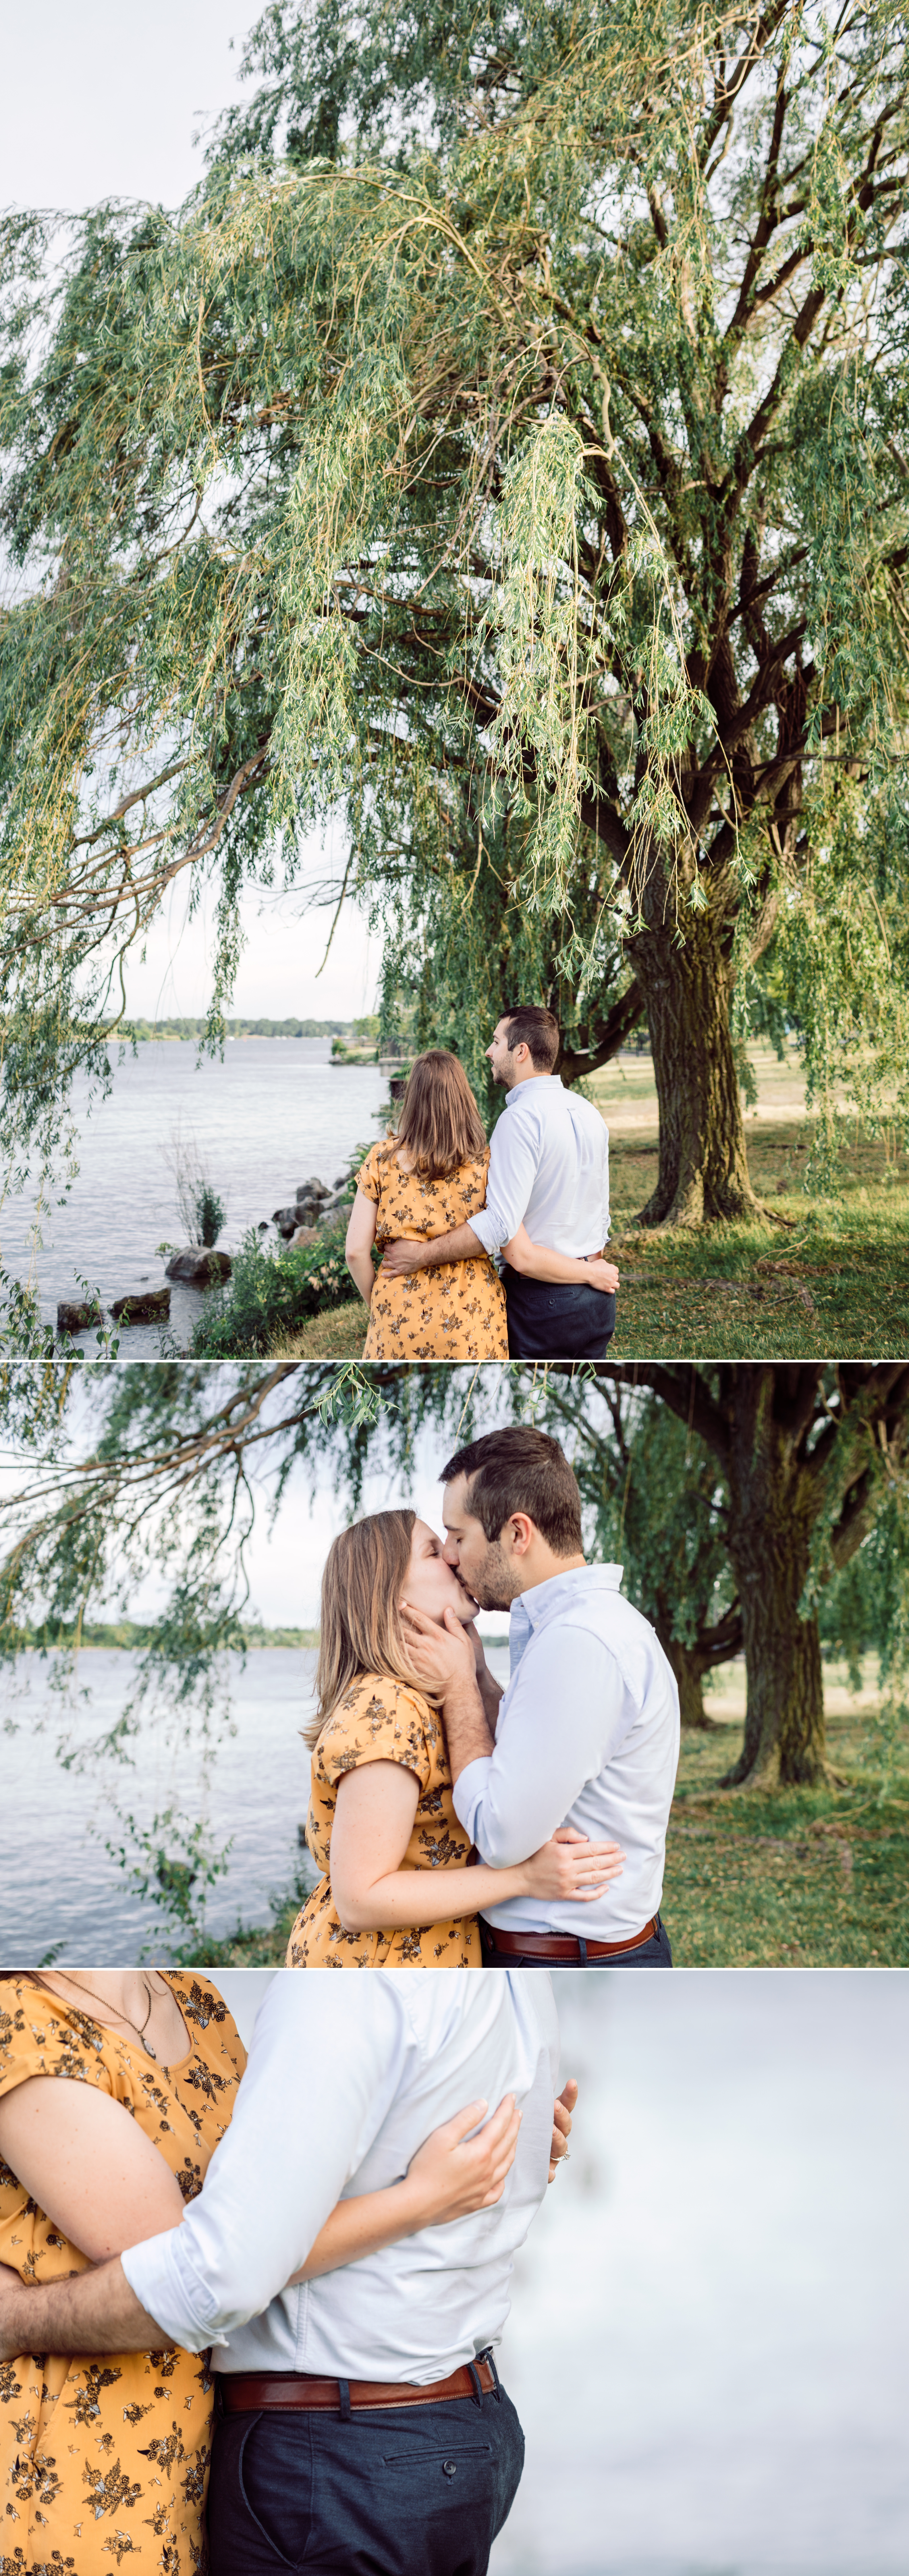 A couples Engagement Session in downtown wyandotte michigan near the waterfront with a willow tree in the background.